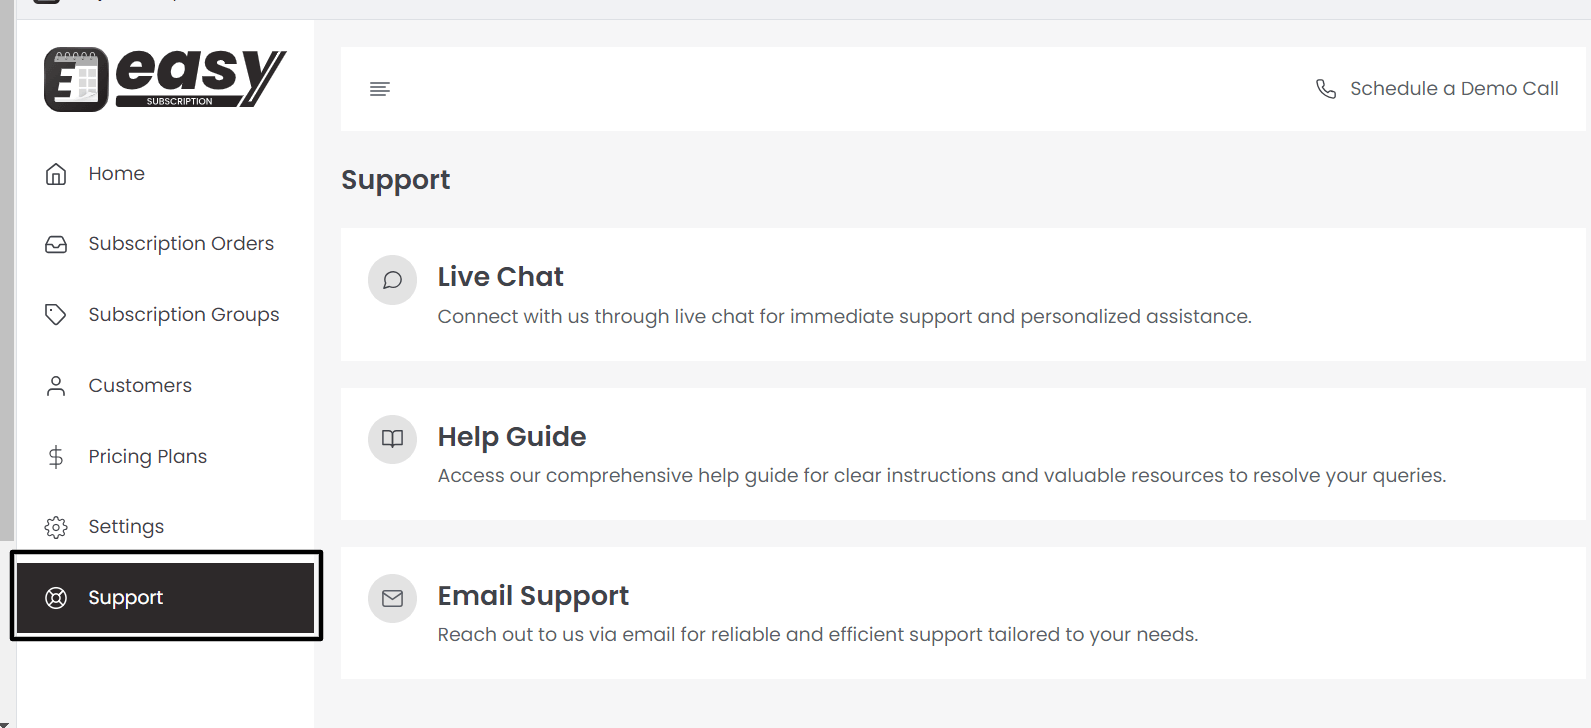 Ways to access assistance and support for the app